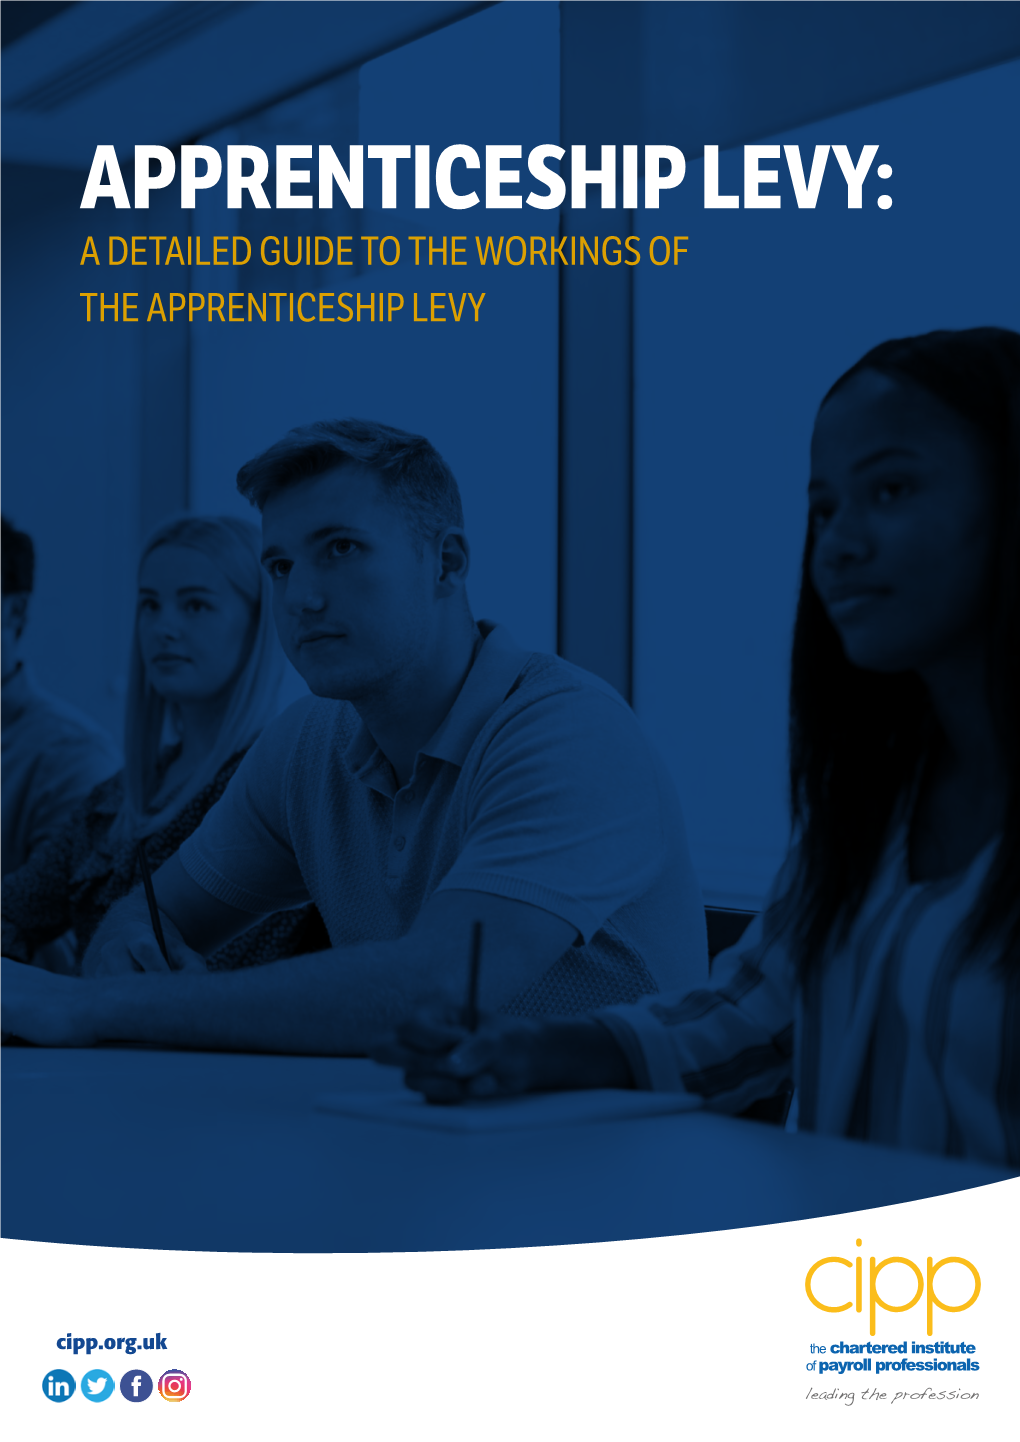 Apprenticeship Levy: a Detailed Guide to the Workings of the Apprenticeship Levy